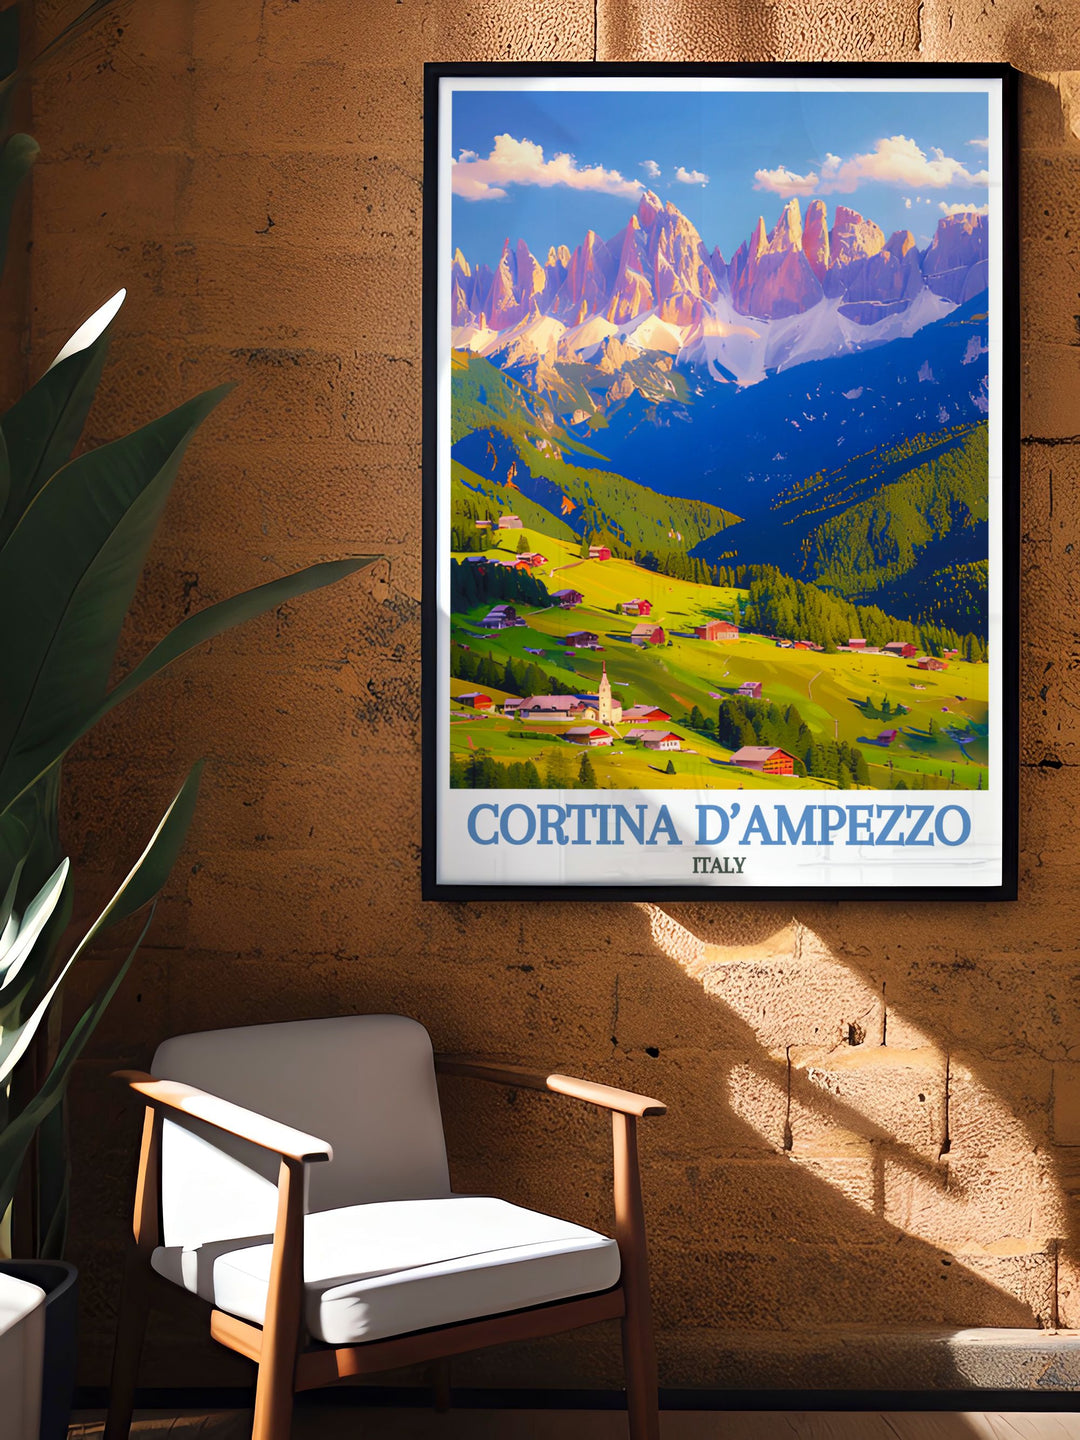 Celebrate the natural wonder of the Dolomite Mountains with our exquisite art prints. Capturing the rugged cliffs, alpine meadows, and serene valleys, these prints bring the breathtaking landscapes of this UNESCO World Heritage site into your home.